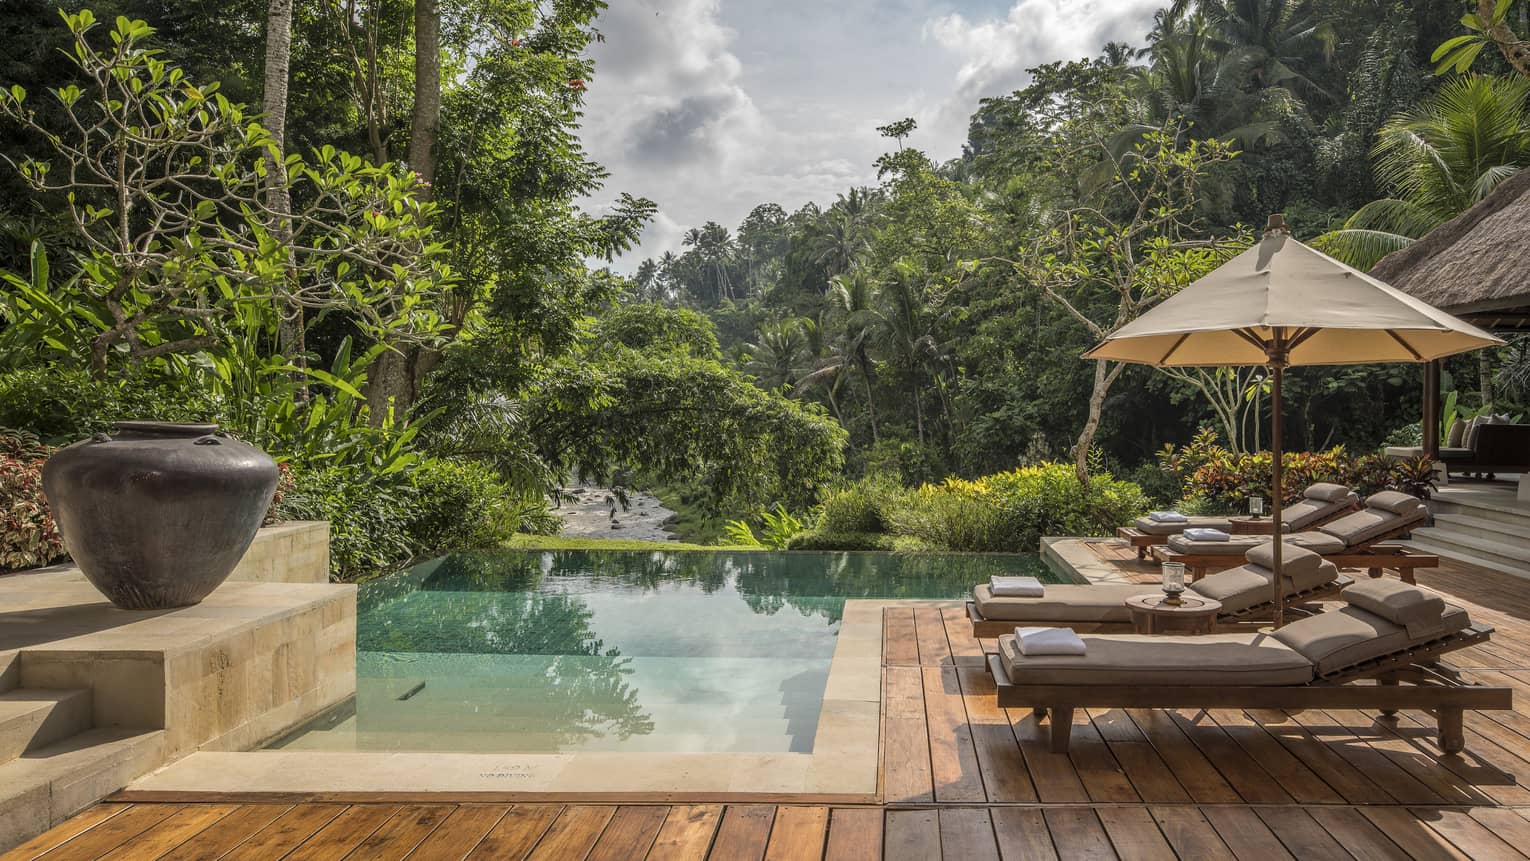 A relaxing villa with an infinity pool overlooking a river in Bali